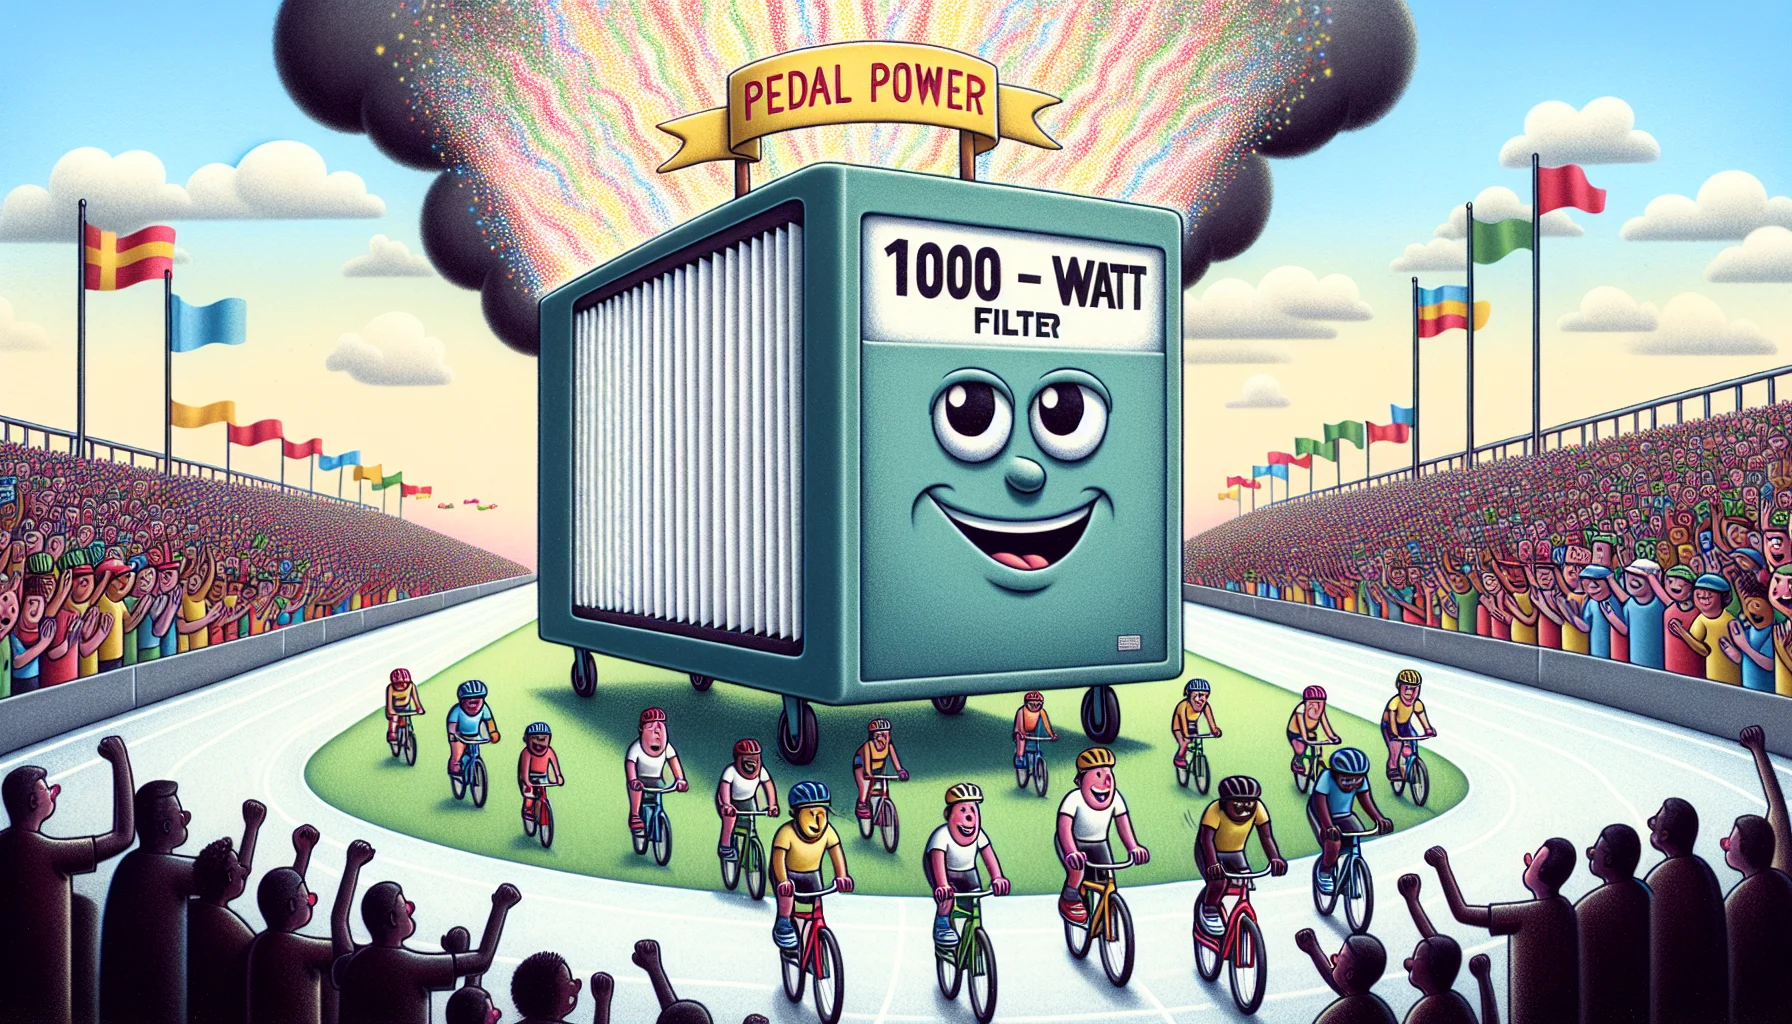 Visualize a whimsical and engaging scenario where a large 1000 - 2000 Watt Filter is the center of attention. This filter is anthropomorphized, with cartoon eyes and a beaming smile. It's participating in a bicycle race with a group of diverse people of various descents and genders, pedalling hard to generate electricity. Plumes of colorful sparks emanate from the filter, representing the generated power. The background is embellished with a cheering crowd of different people, a grandstand with flags, and a clear sky. The banner overhead reads, 'Pedal Power - Race for Clean Energy'.